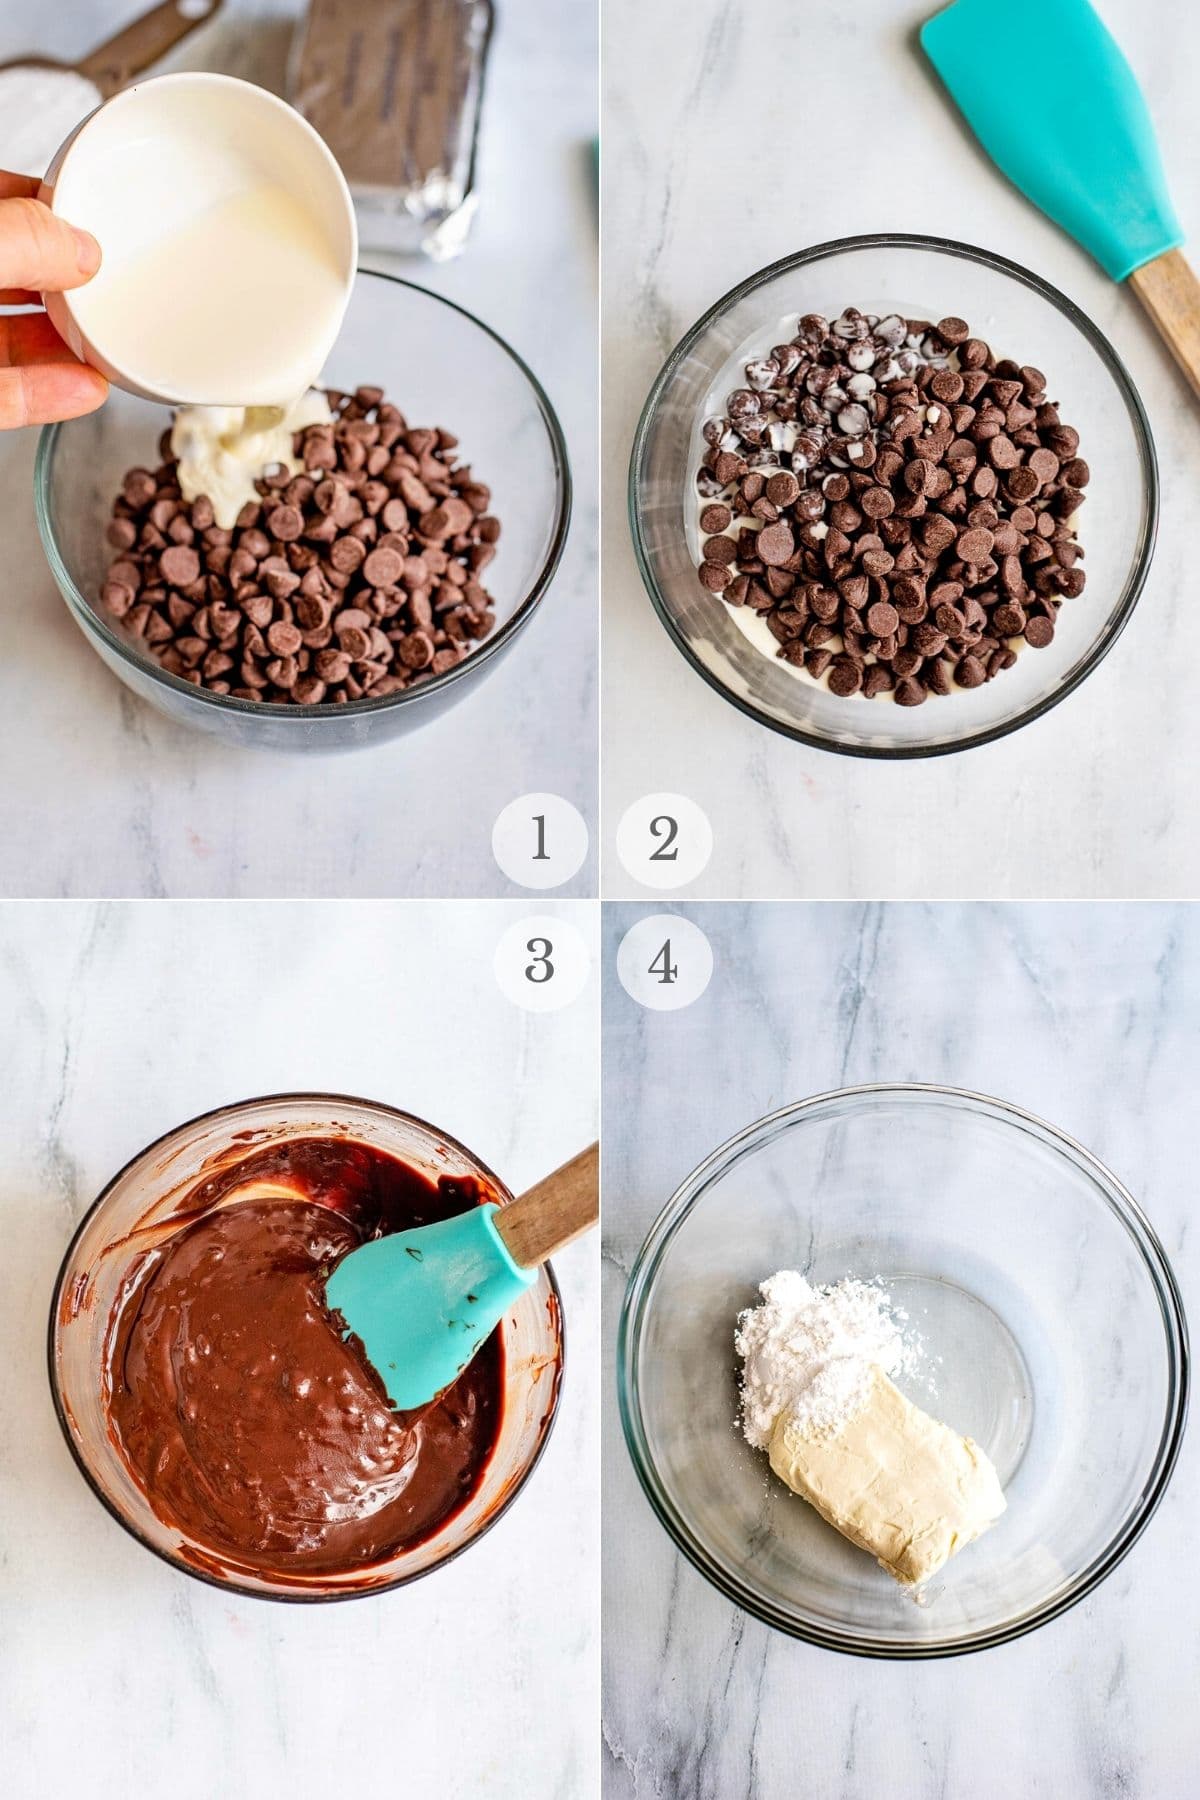 chocolate cream cheese frosting recipe steps 1-4